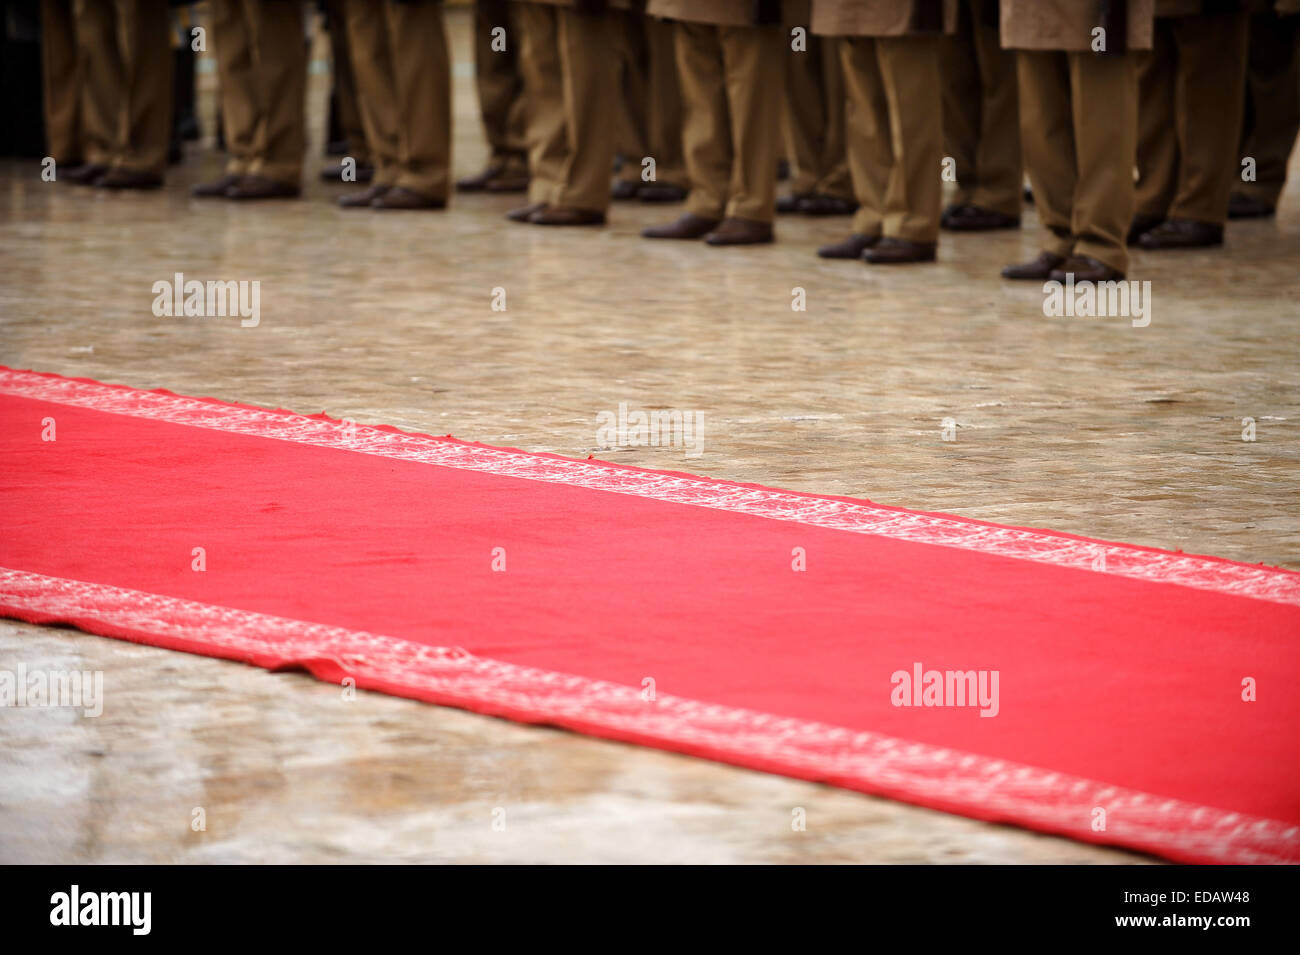 Guard of honor soldiers in front of the red carpet during military ceremony Stock Photo